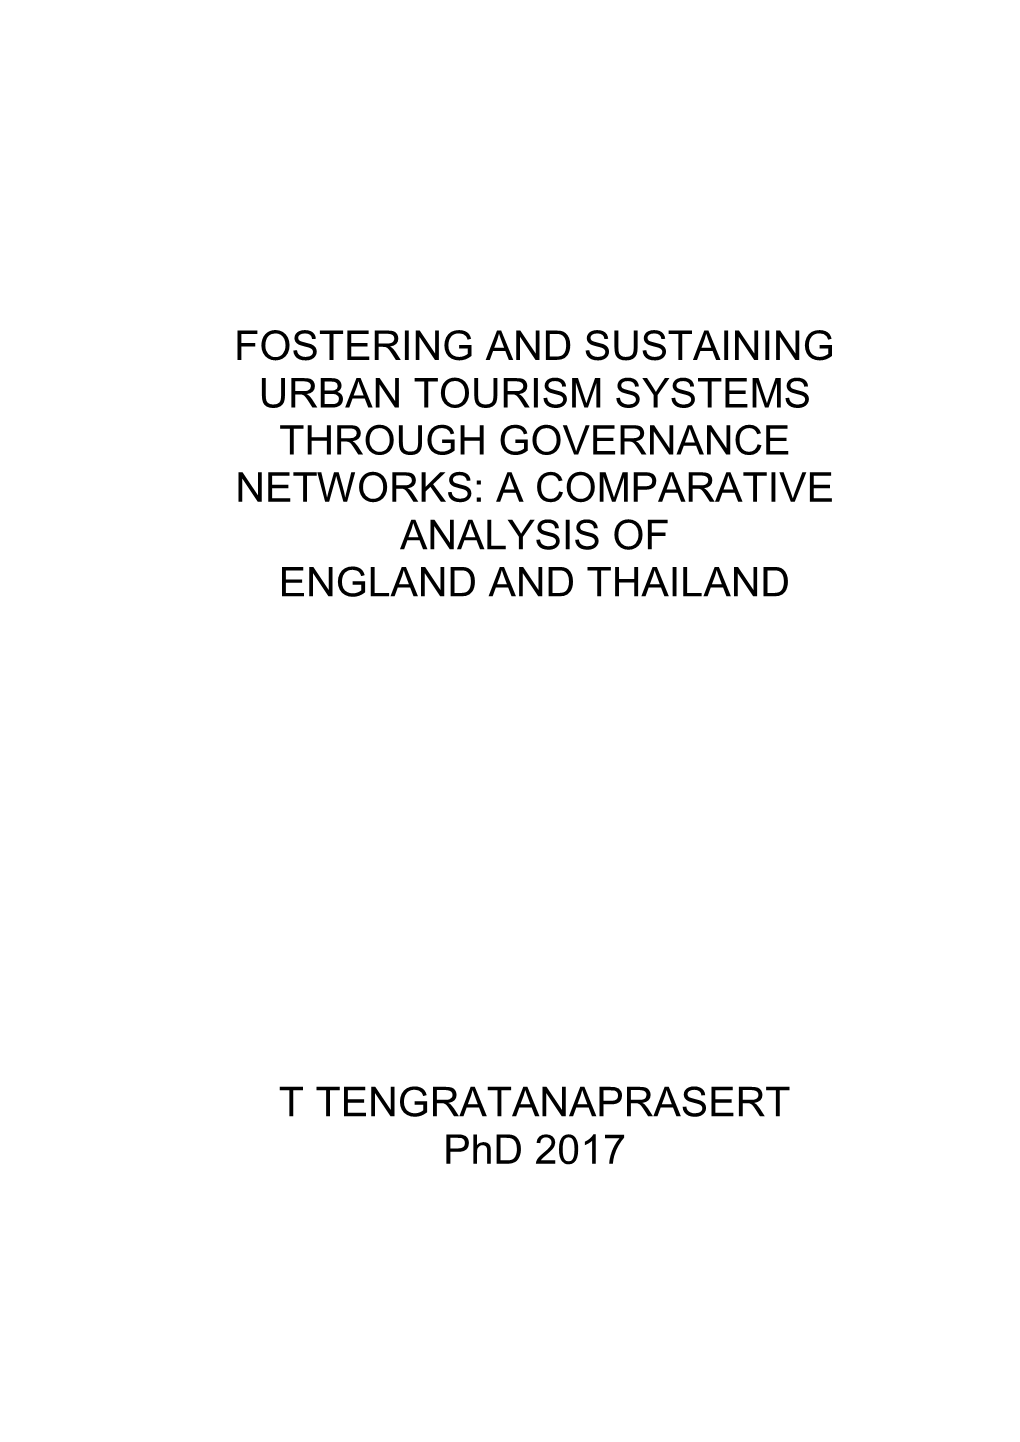 Fostering and Sustaining Urban Tourism Systems Through Governance Networks: a Comparative Analysis of England and Thailand